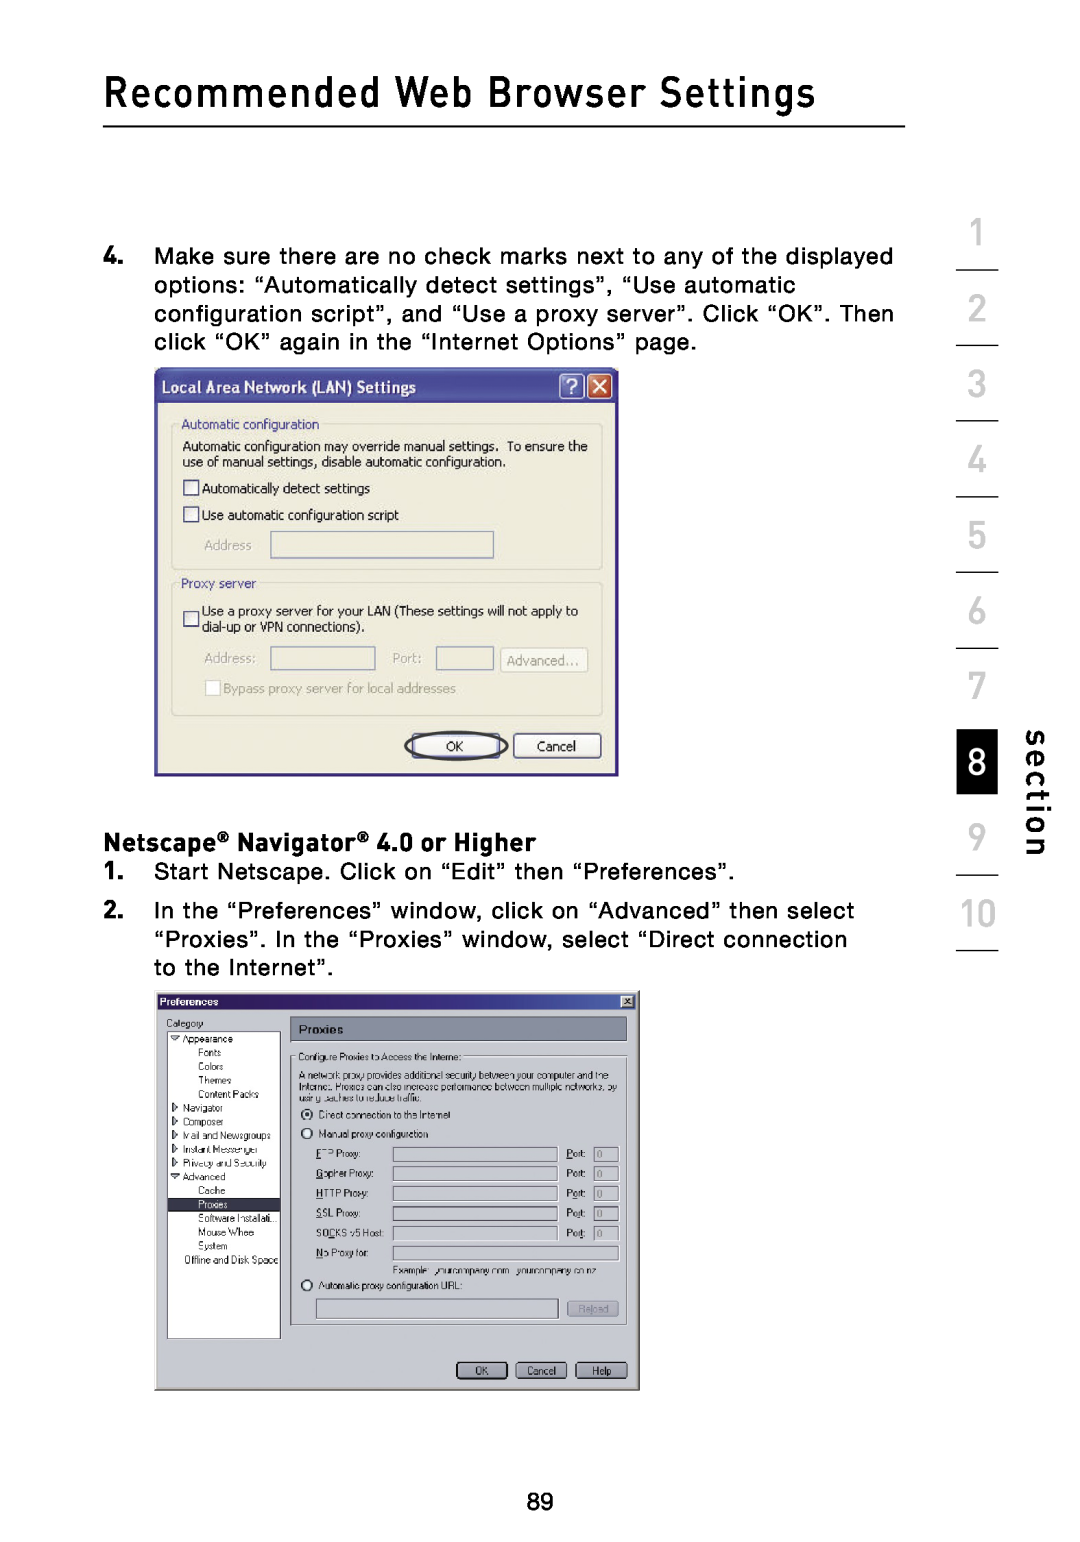 Belkin N1 user manual Netscape Navigator 4.0 or Higher, Recommended Web Browser Settings, section 